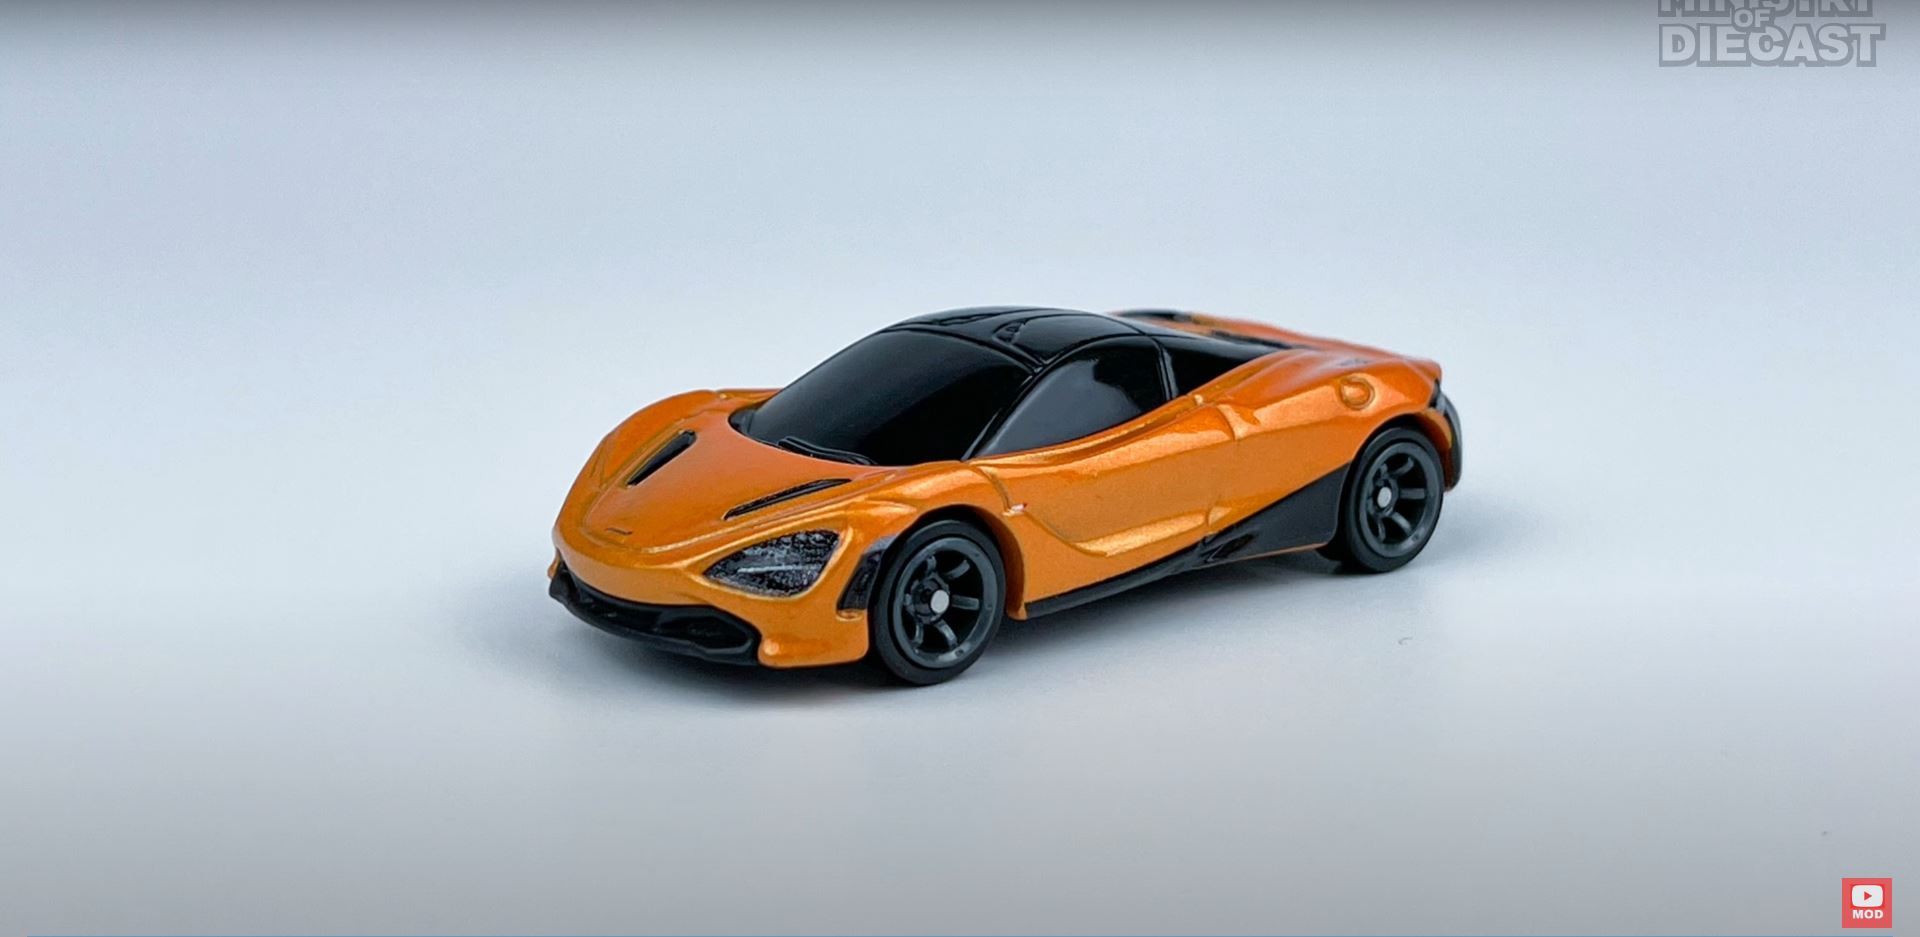 2023 Hot Wheels 'Speed Machines' Series of Five Cars Reveals Sixth